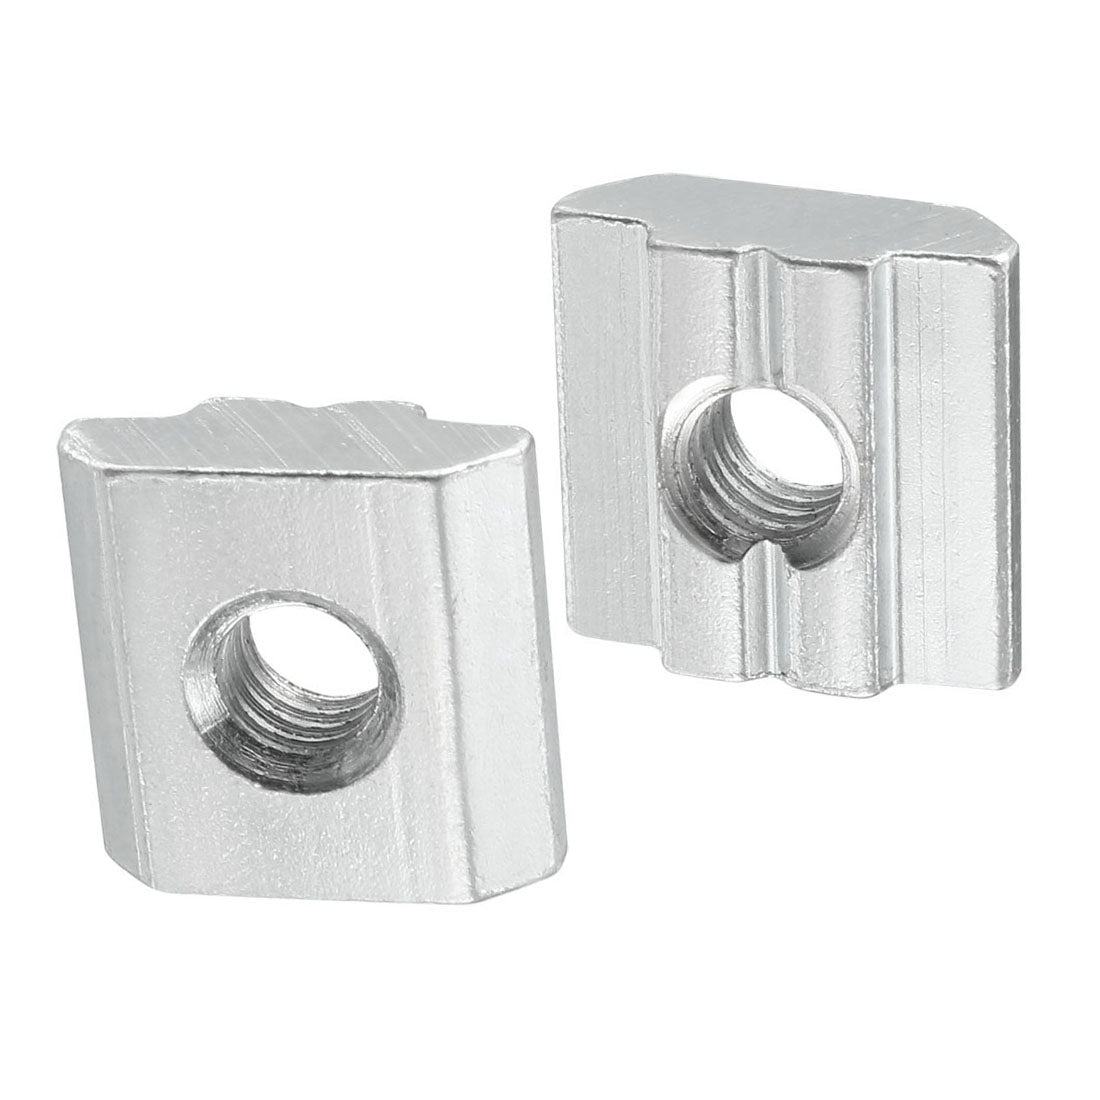 Uxcell Uxcell Slide in T-Nut, M8 Threaded for 3030 Series Aluminum Extrusions Profile 5pcs